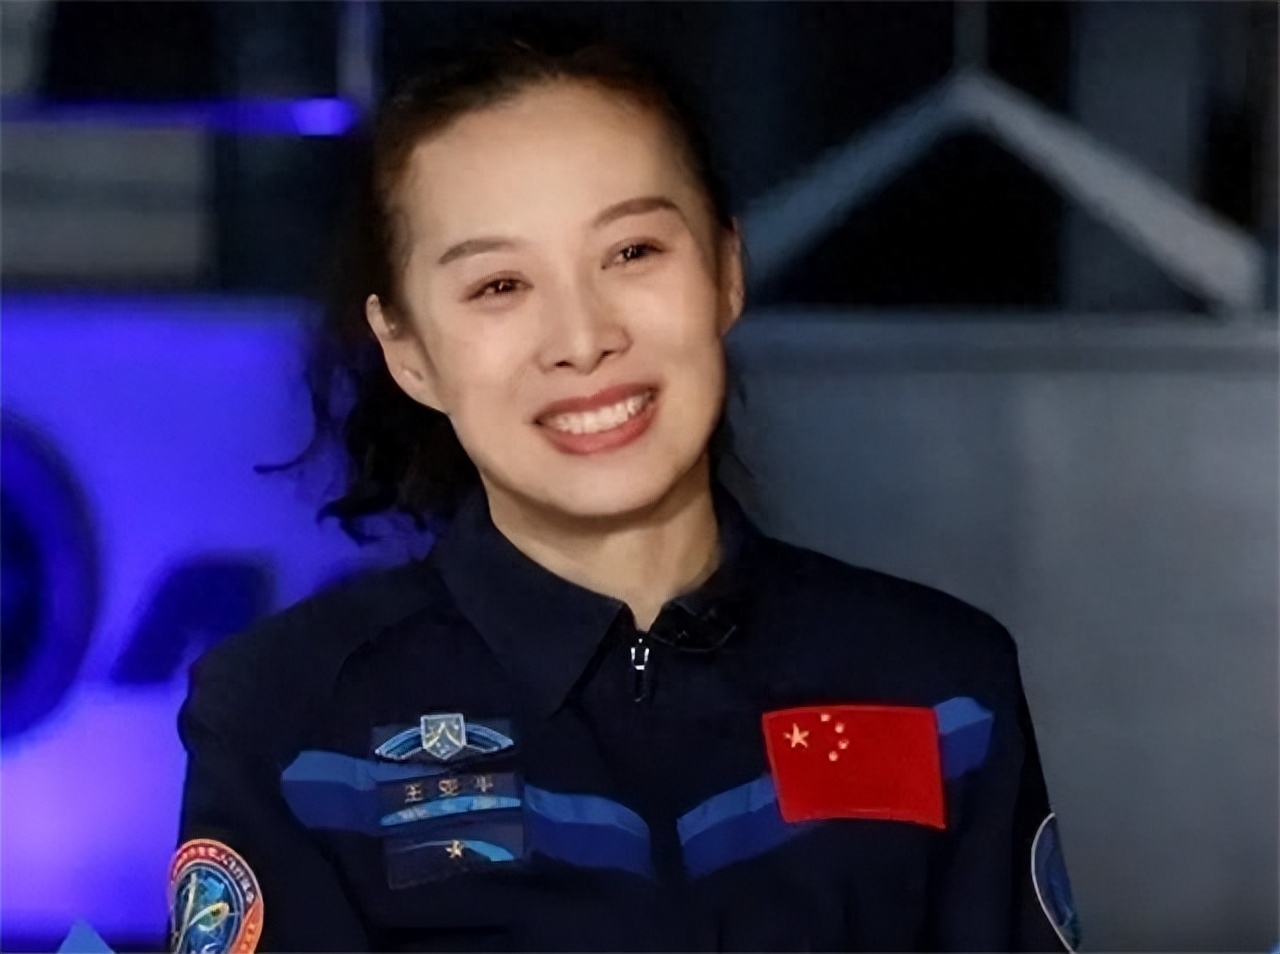 How difficult is it for female astronaut Wang Yaping of Shenzhou 13 to walk outside the spacecraft? The sacrifice is too great to be admirable